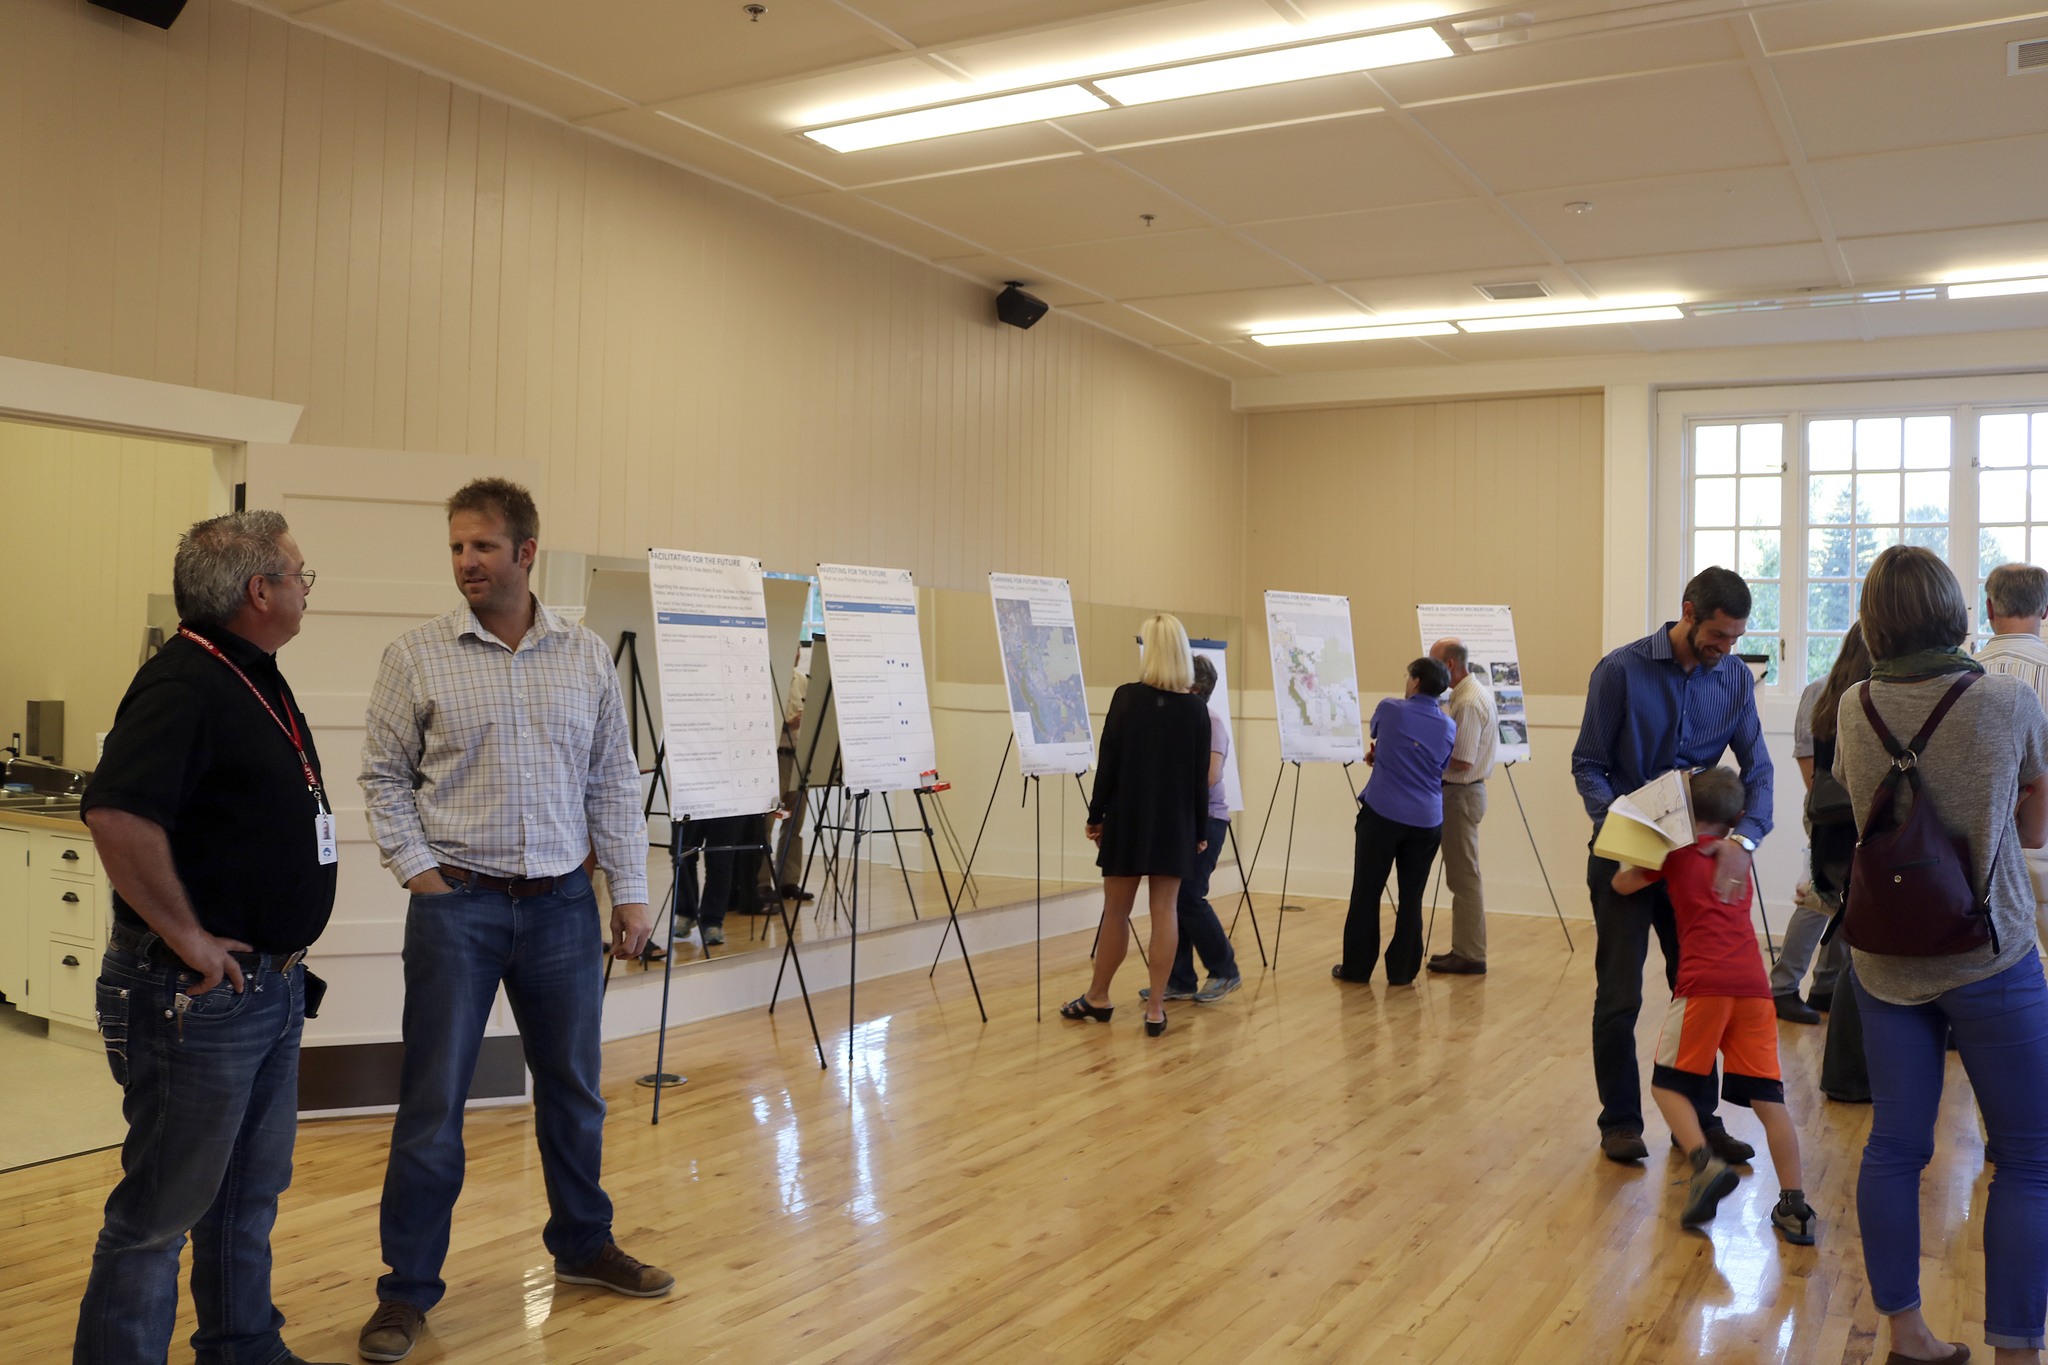 Si View Community Center welcomed visitors Sept. 14 to leave feedback on the future plans of the parks district.